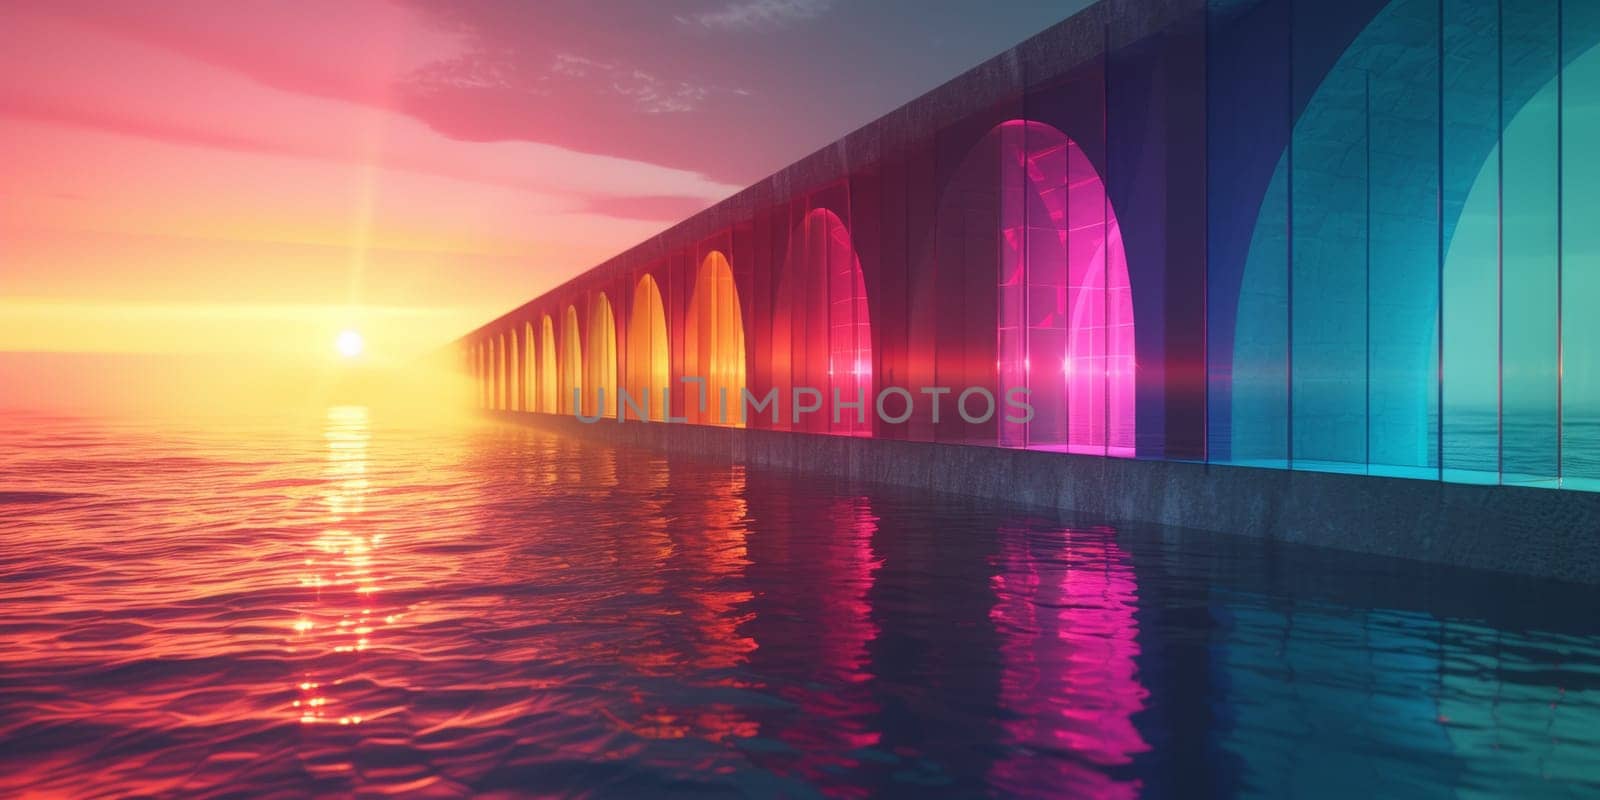 A colorful bridge over water with sunset in background